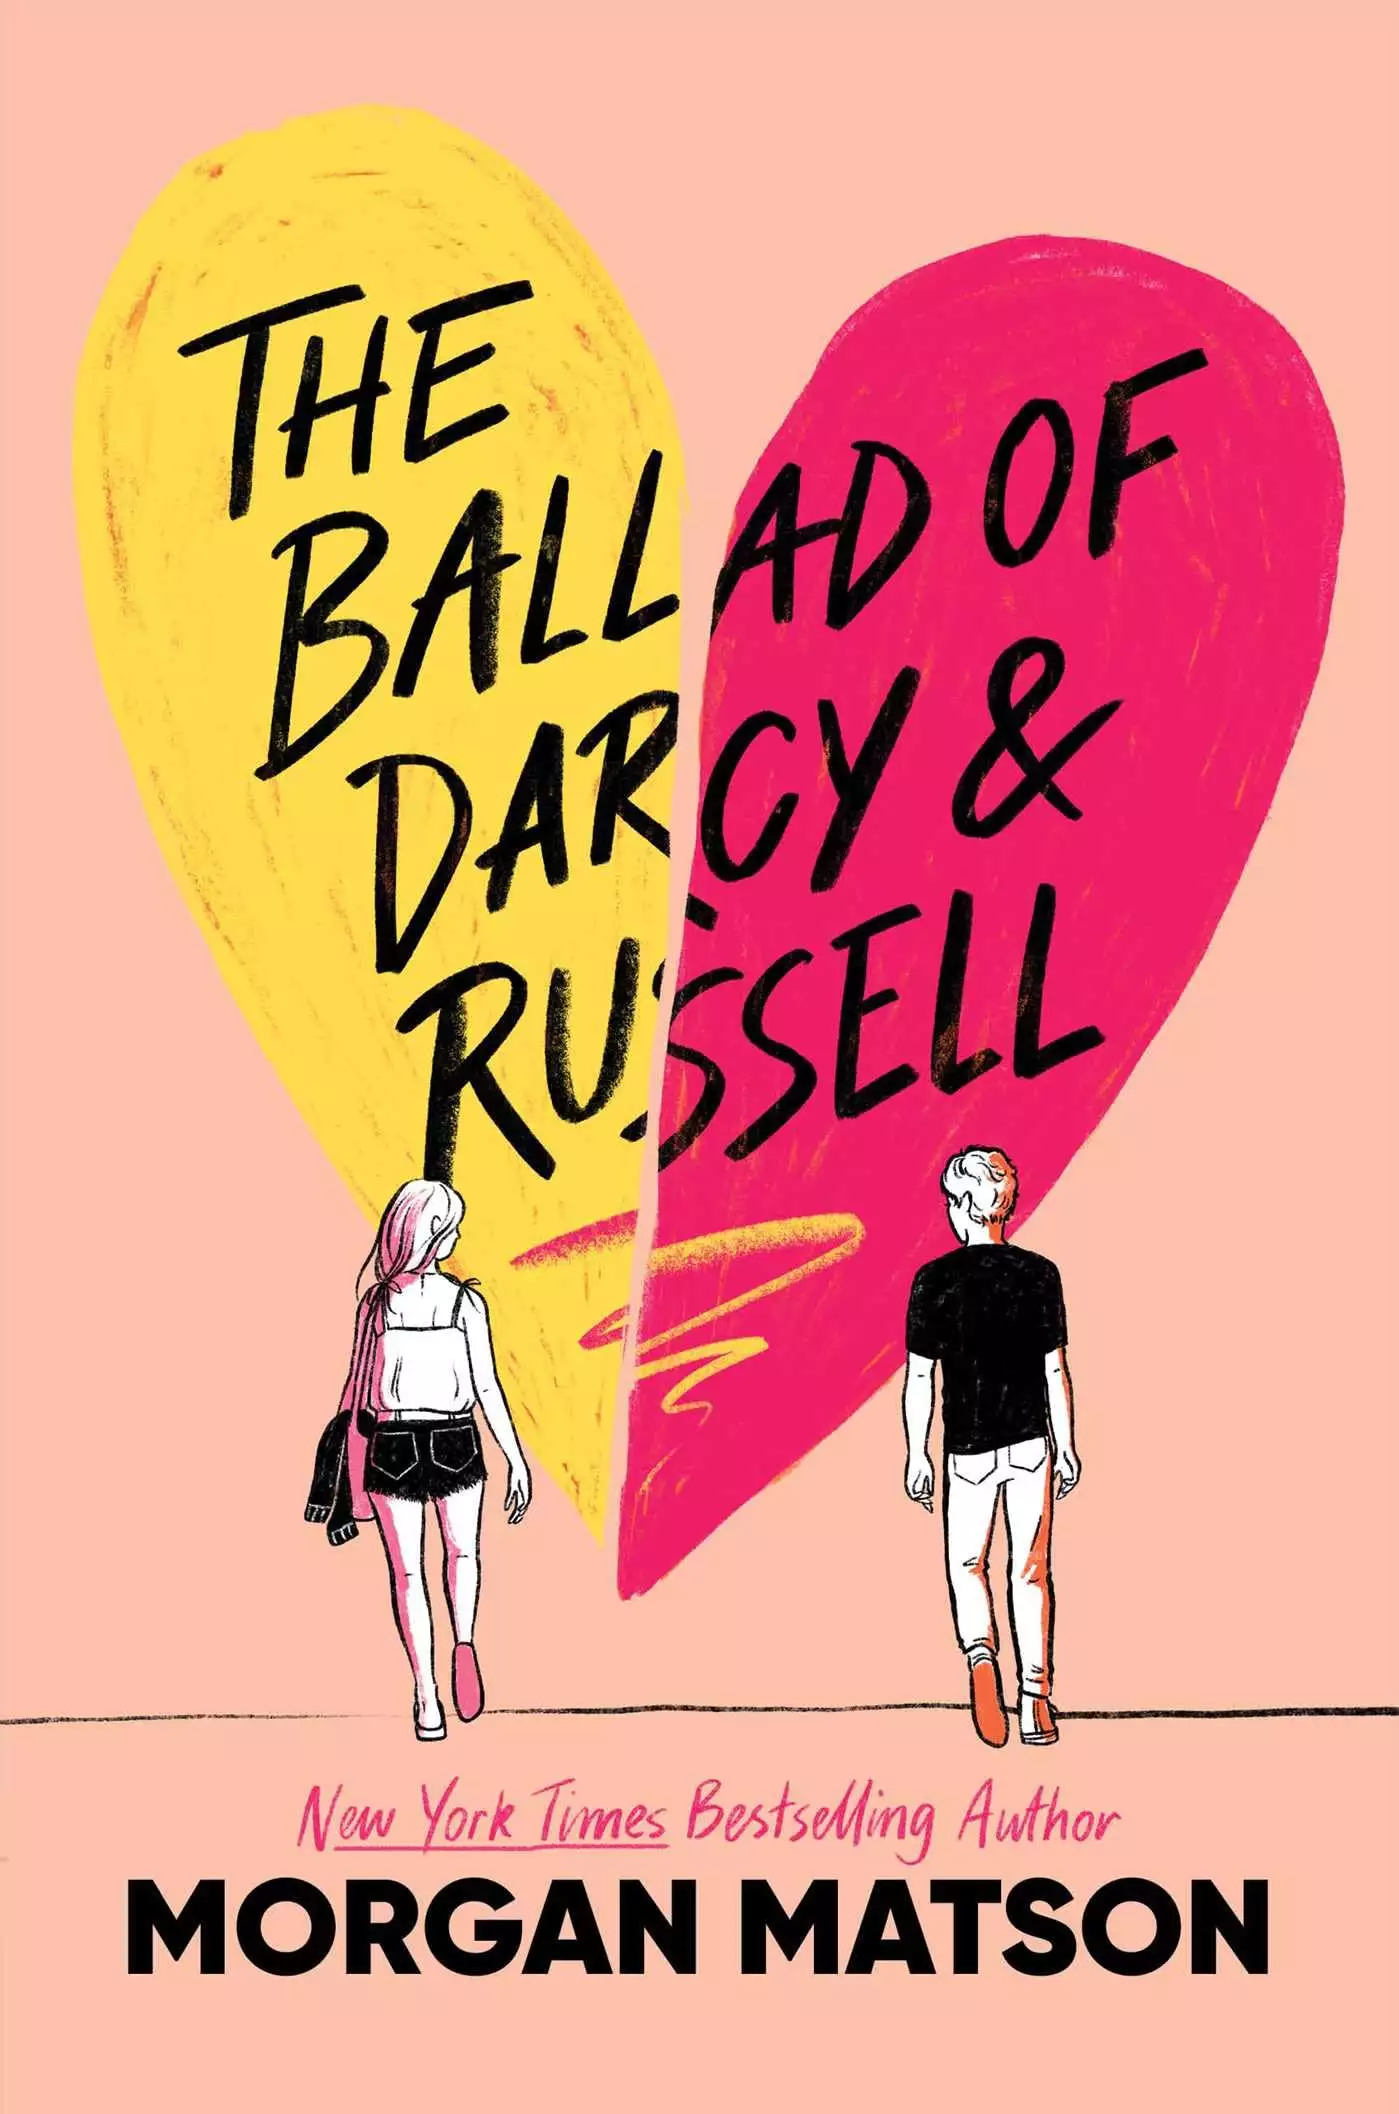 Ballad of Darcy and Russell